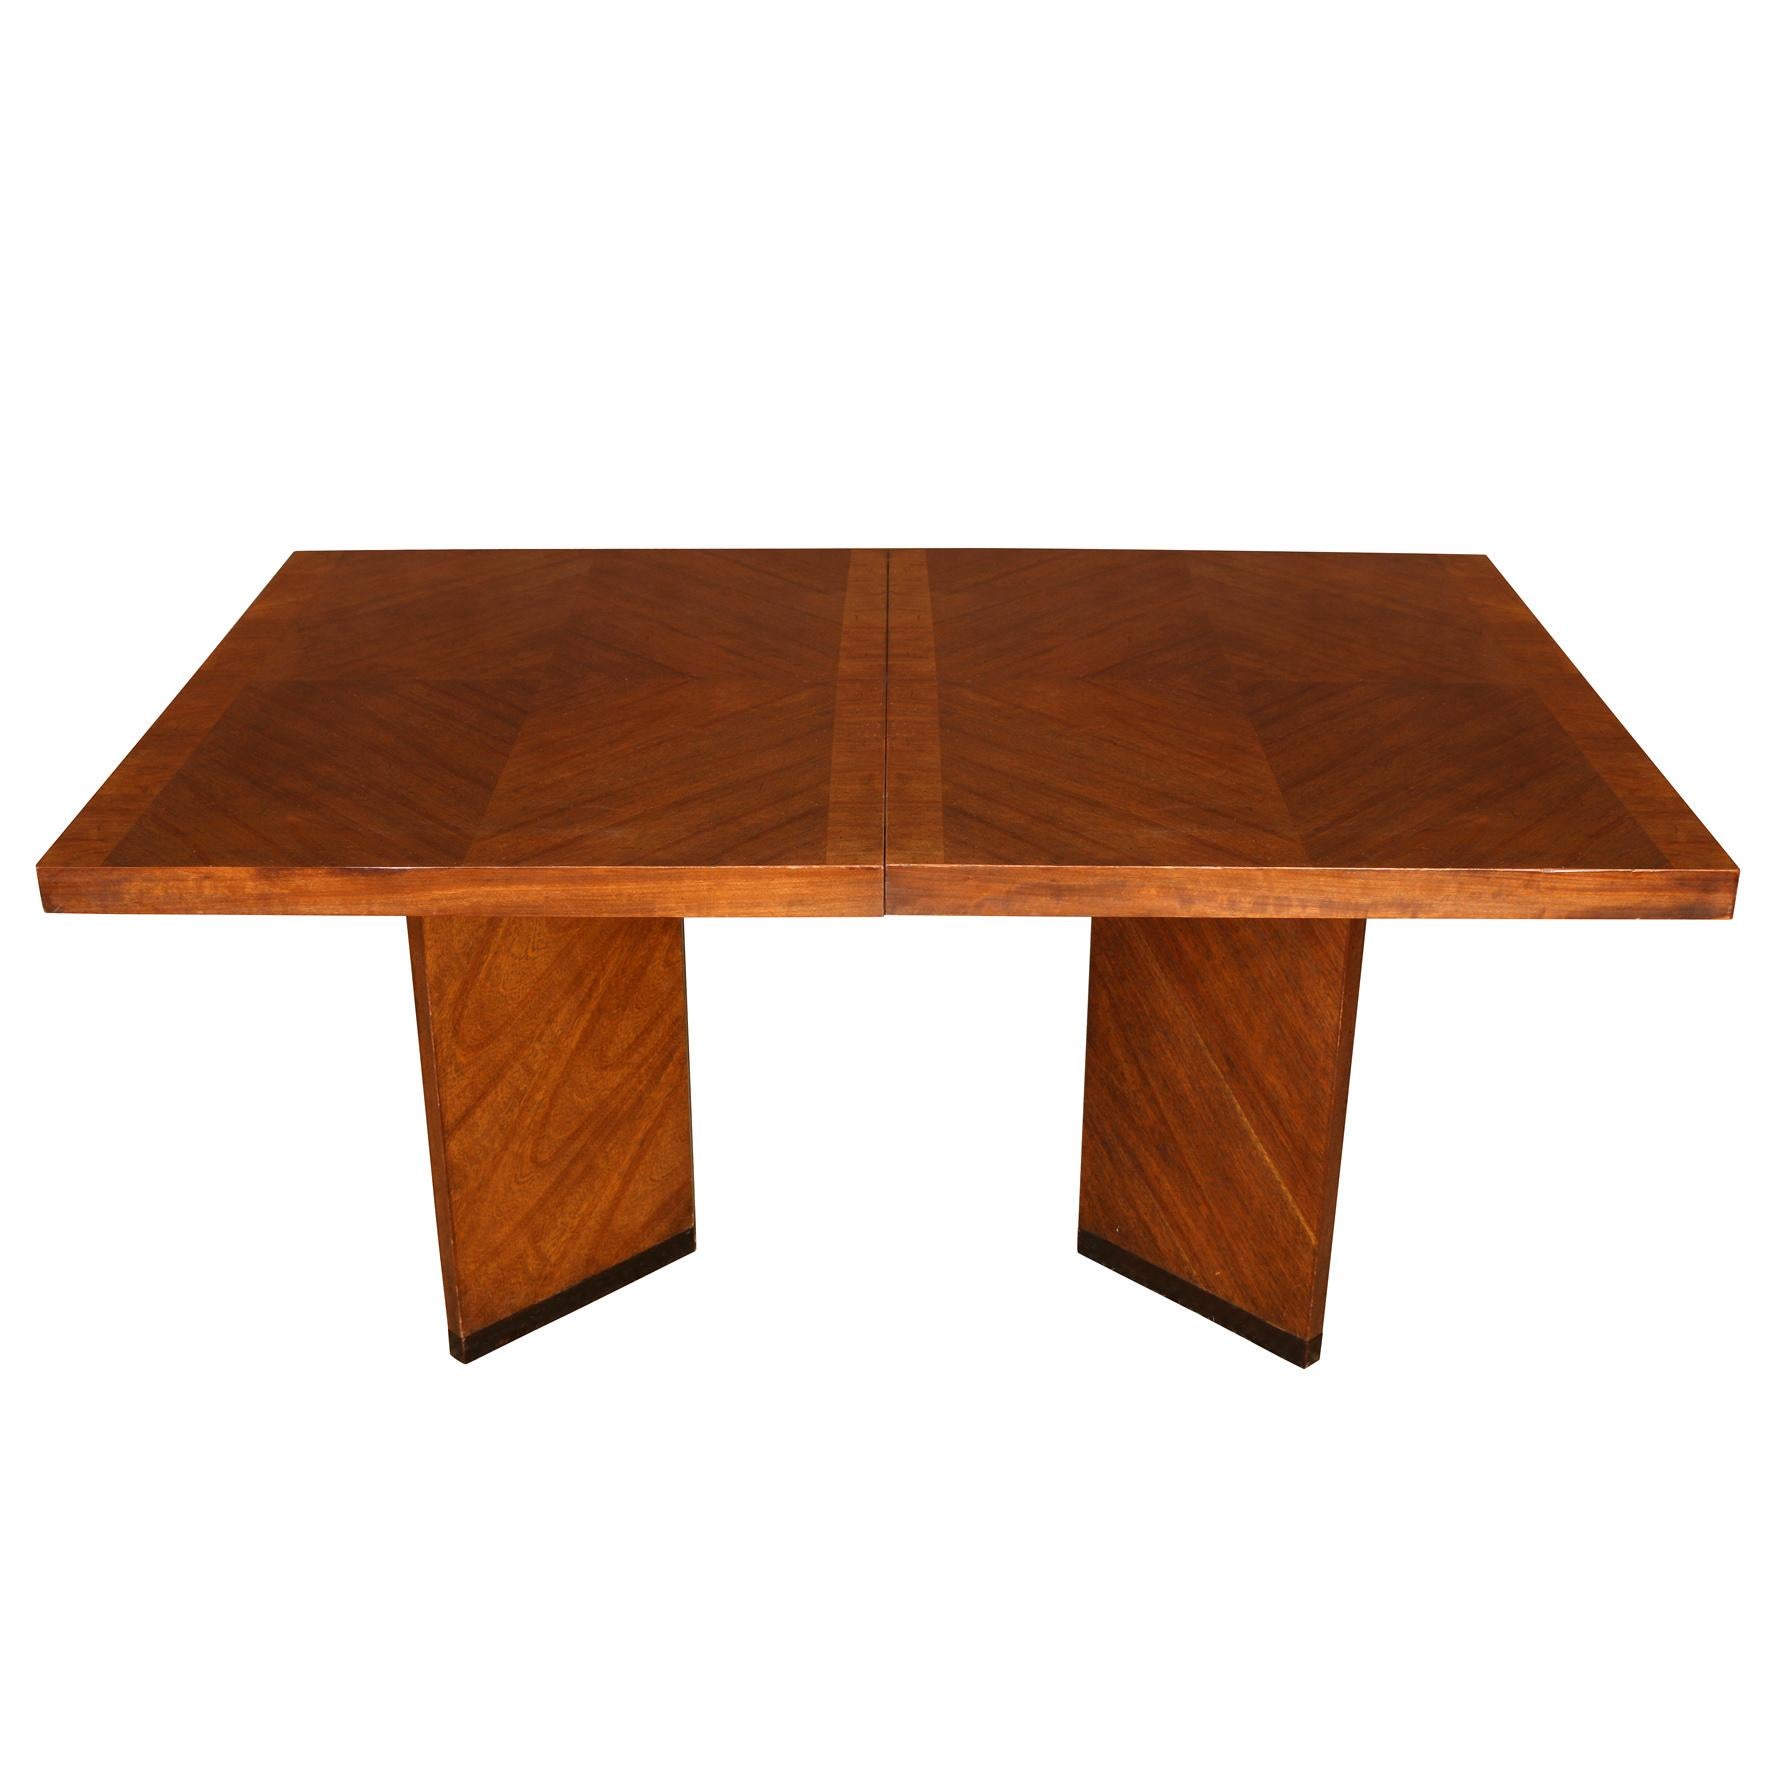 Modern Dining Table With Chevron Design and Angular Legs In Good Condition For Sale In Locust Valley, NY